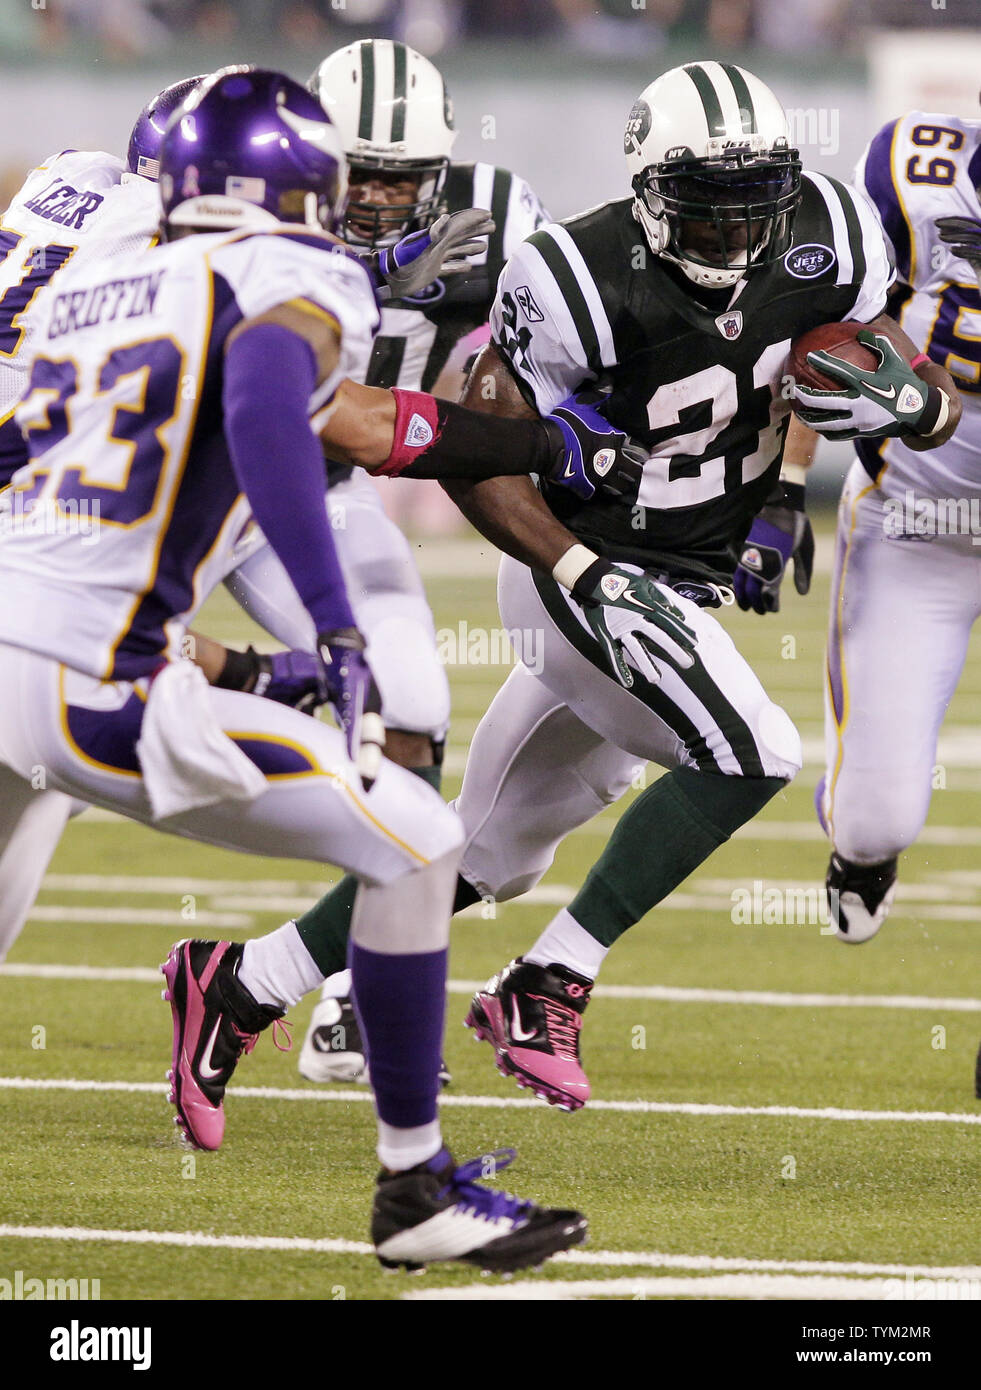 new-york-jets-ladainian-tomlinson-carries-the-ball-in-the-third-quarter-against-the-minnesota-vikings-in-week-5-of-the-nfl-season-at-new-meadowlands-stadium-in-east-rutherford-new-jersey-on-october-11-2010-the-jets-defeated-the-vikings-29-20-upi-john-angelillo-TYM2MR.jpg